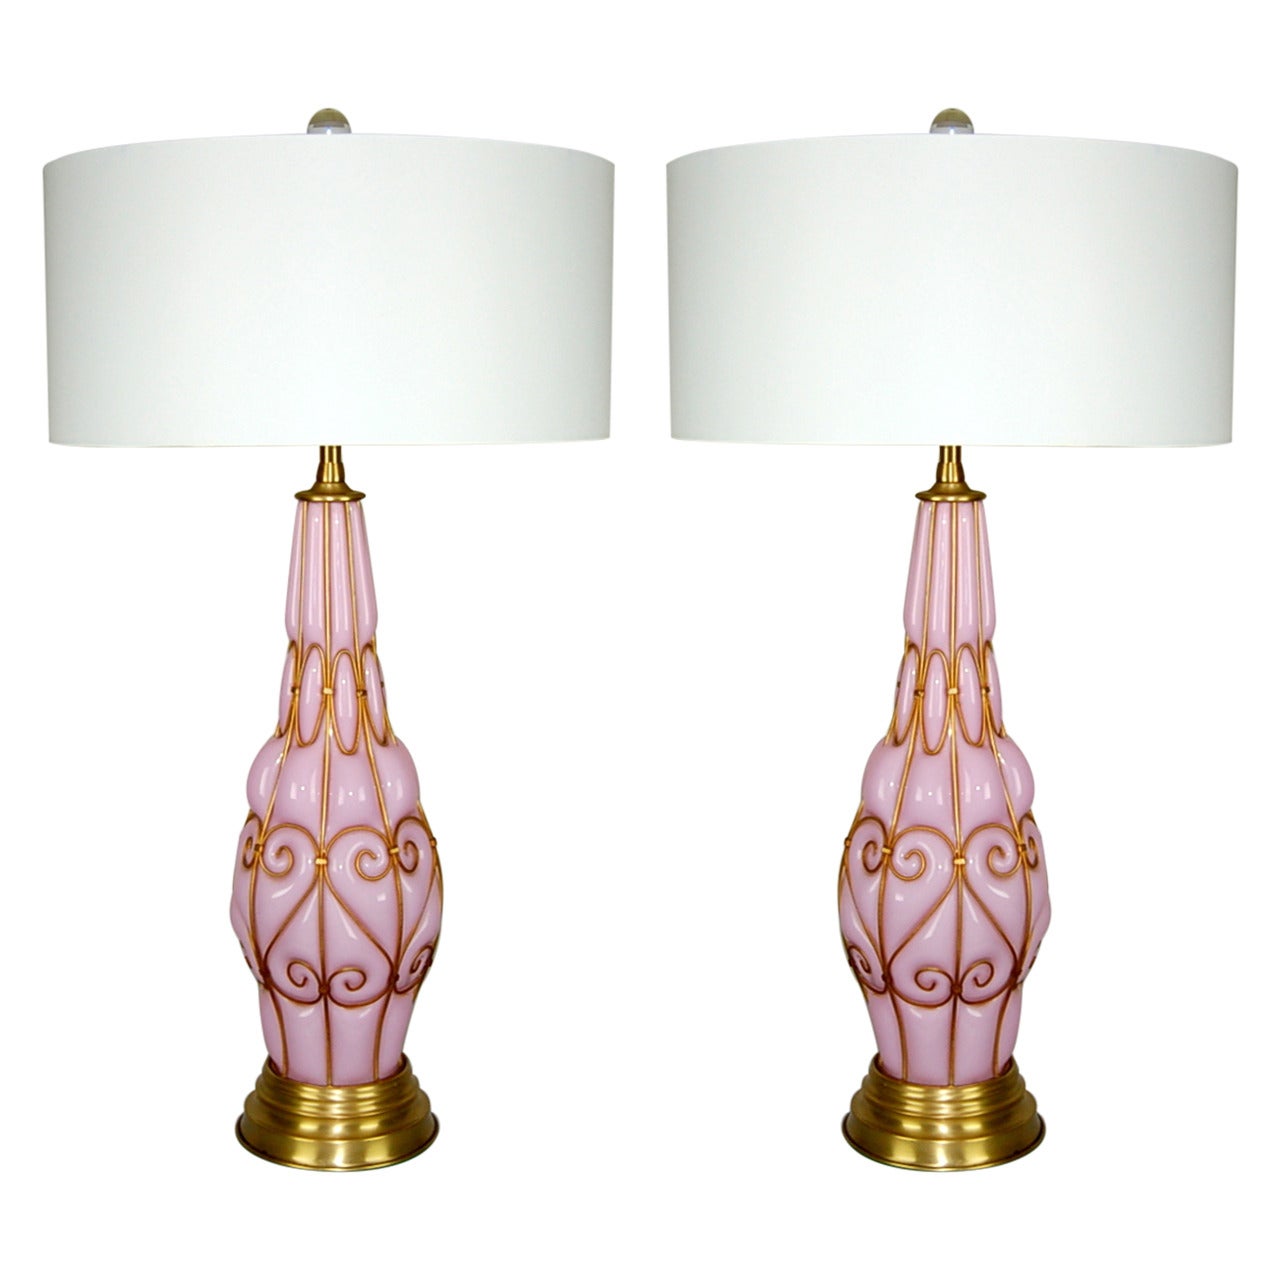 Pair of Vintage Brass Encapsulated Murano Glass Lamps in Pink by Marbro For Sale